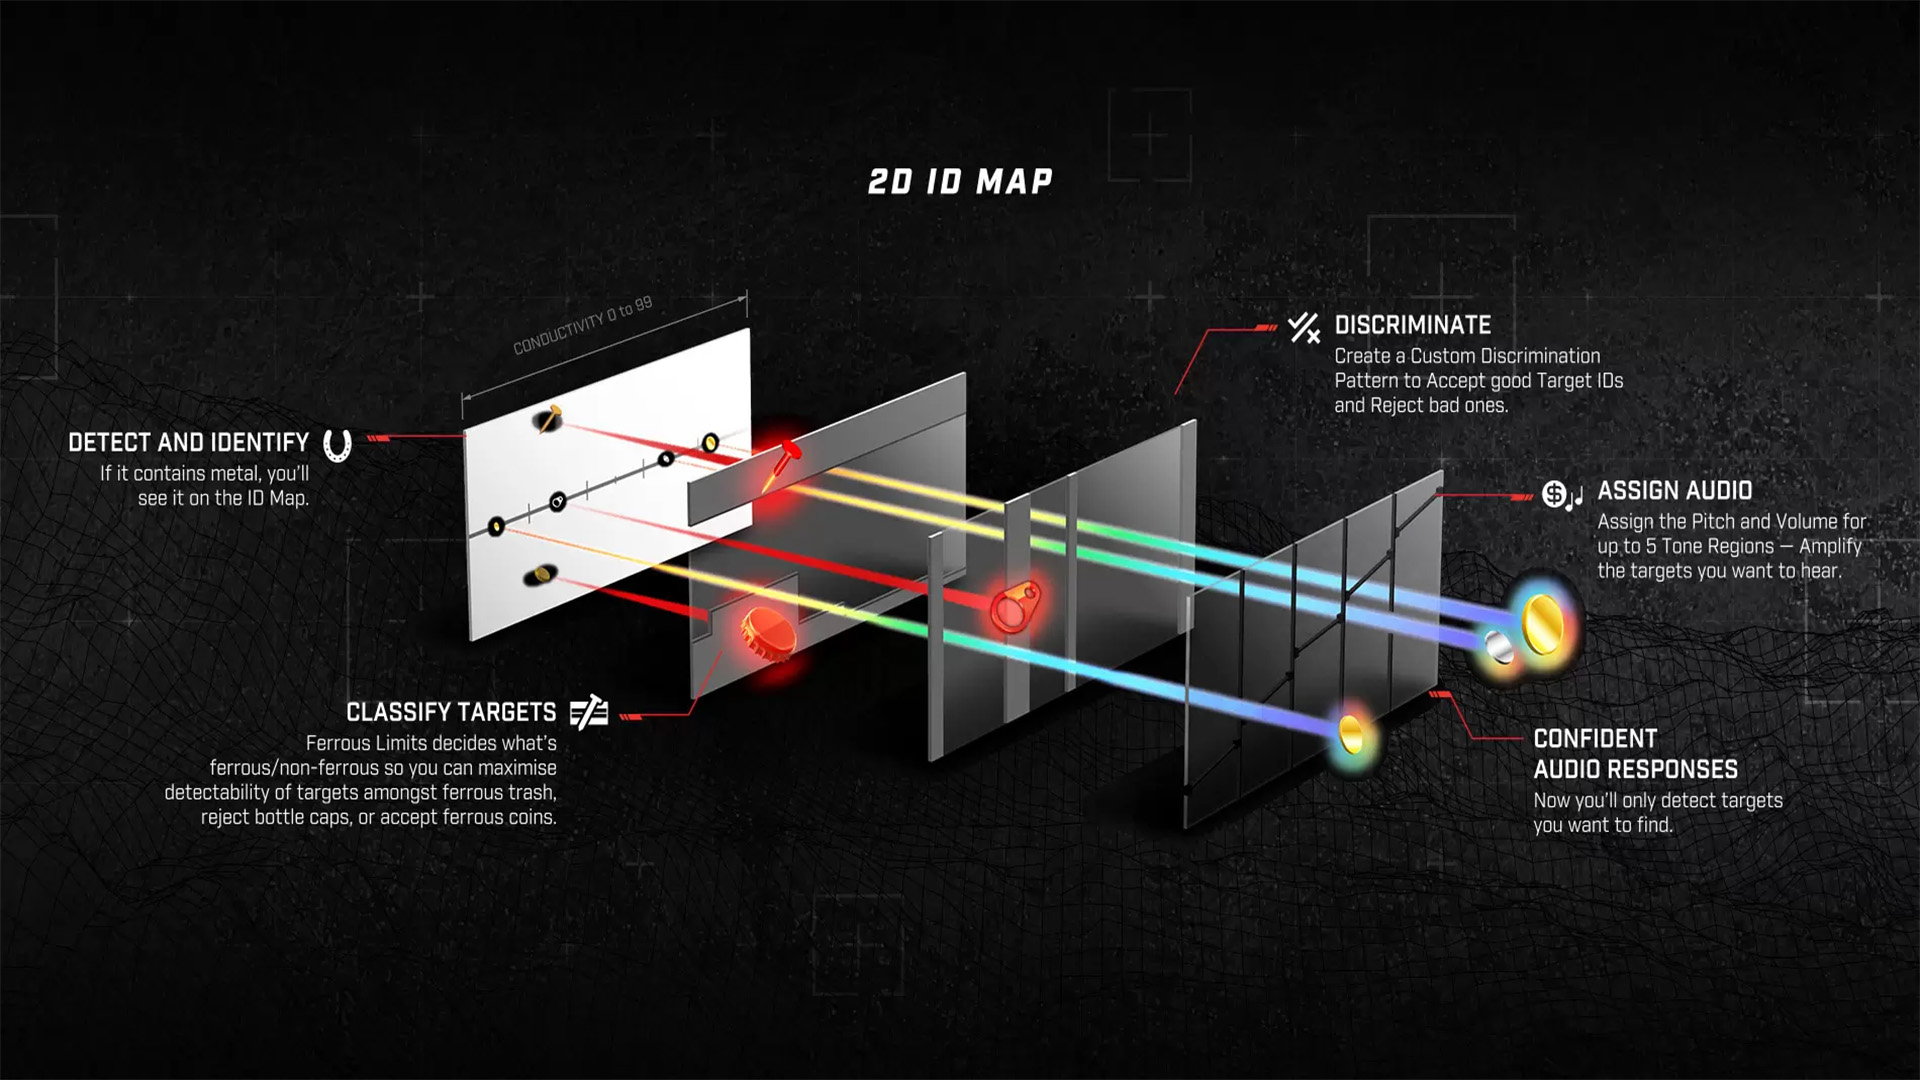 2D ID Mapping